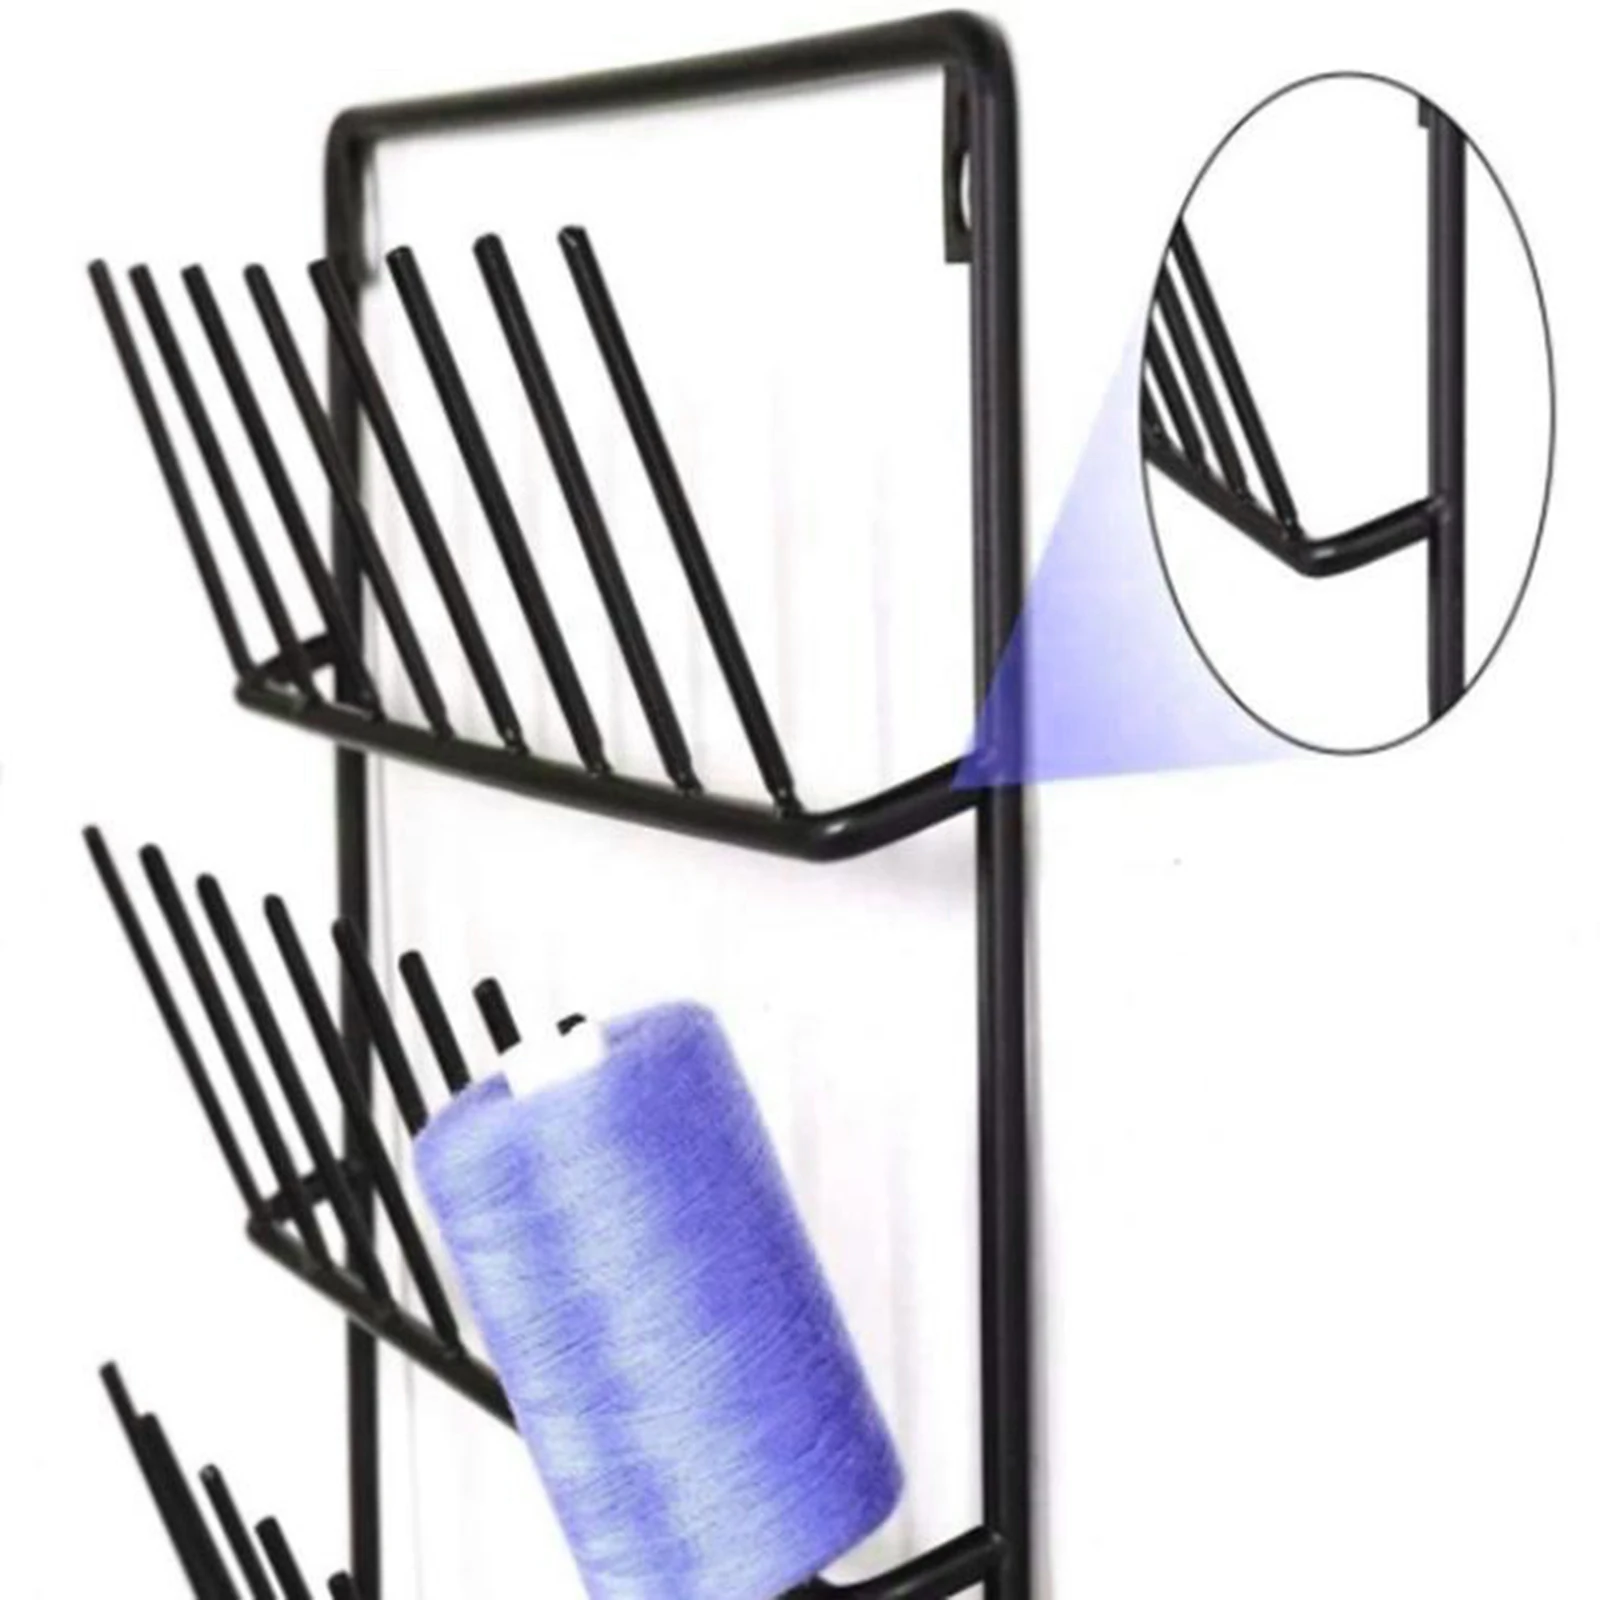 32-Spool Sewing Thread Rack, Wall-Mounted Sewing Thead Holder, Iron Organizer Shelf for Mini Sewing Quilting Jewelry Embroidery